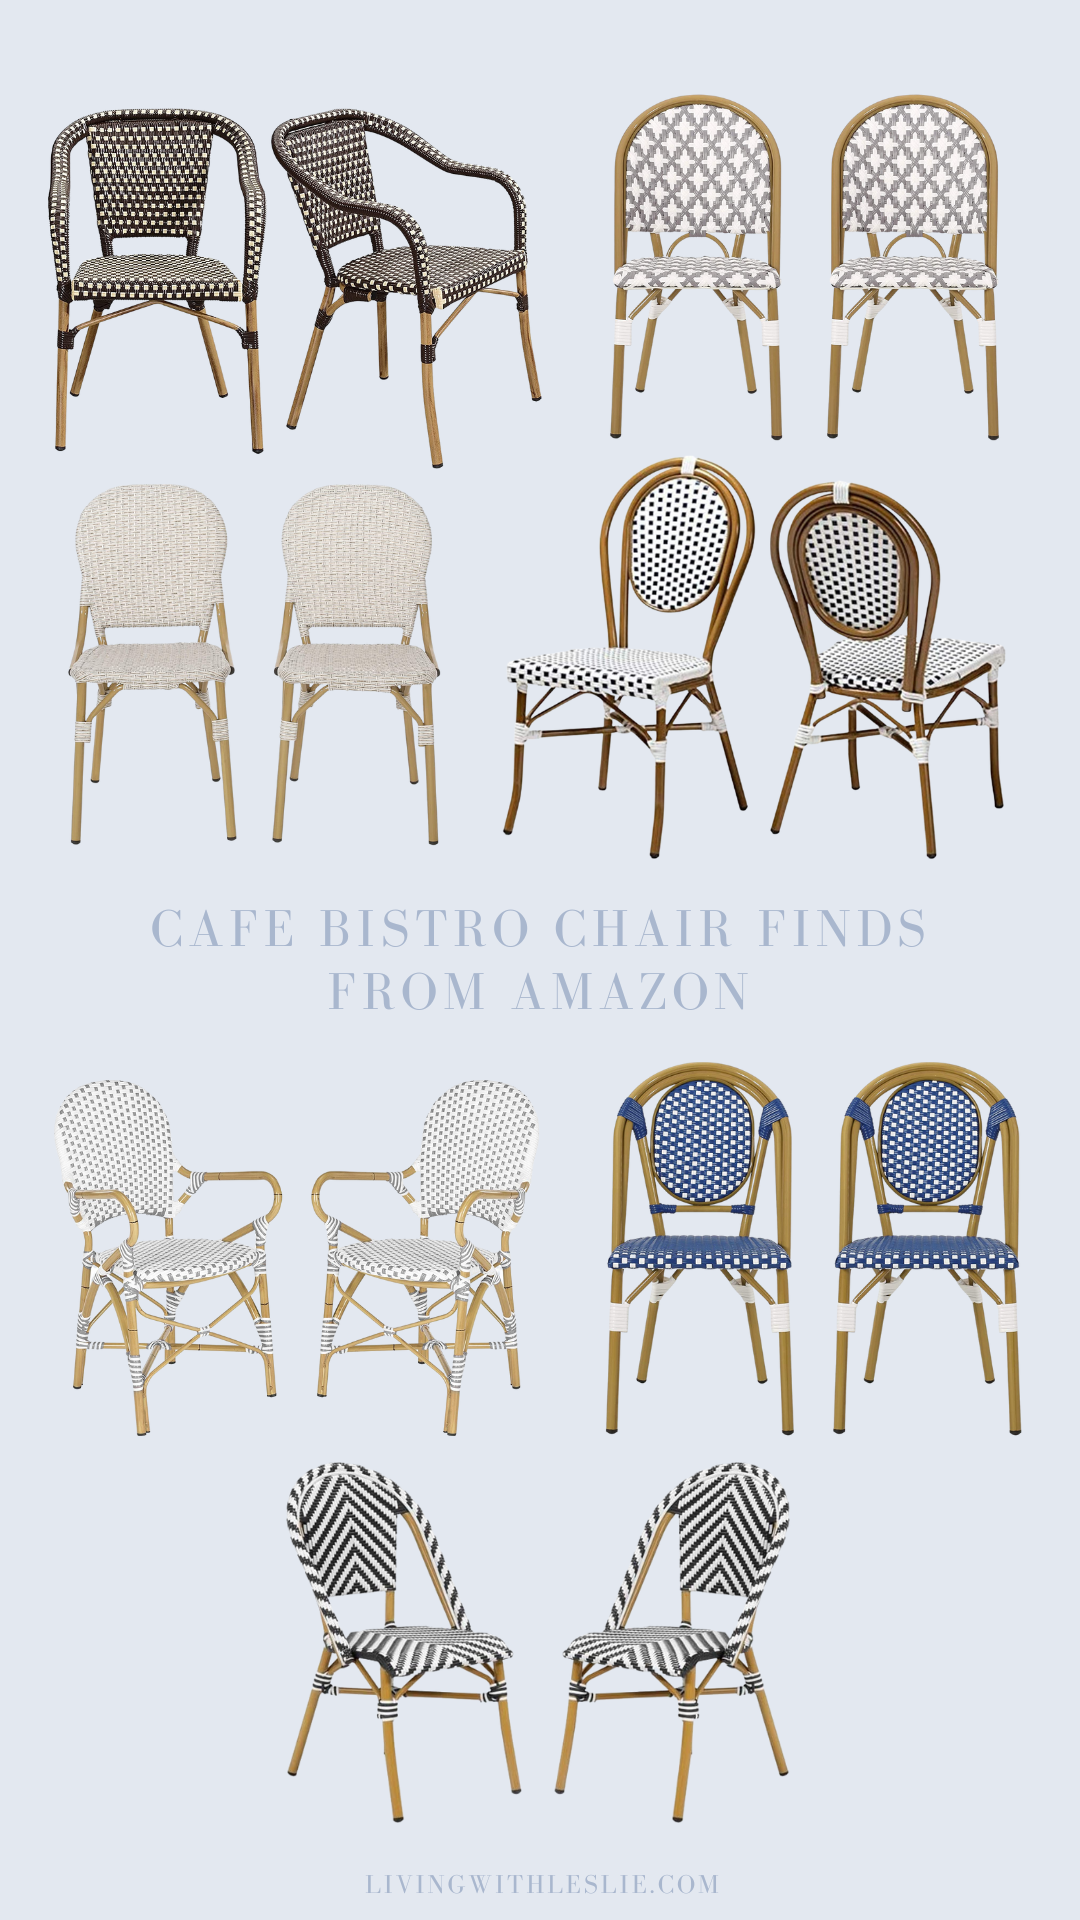 Cafe Bistro Chair Finds from Amazon